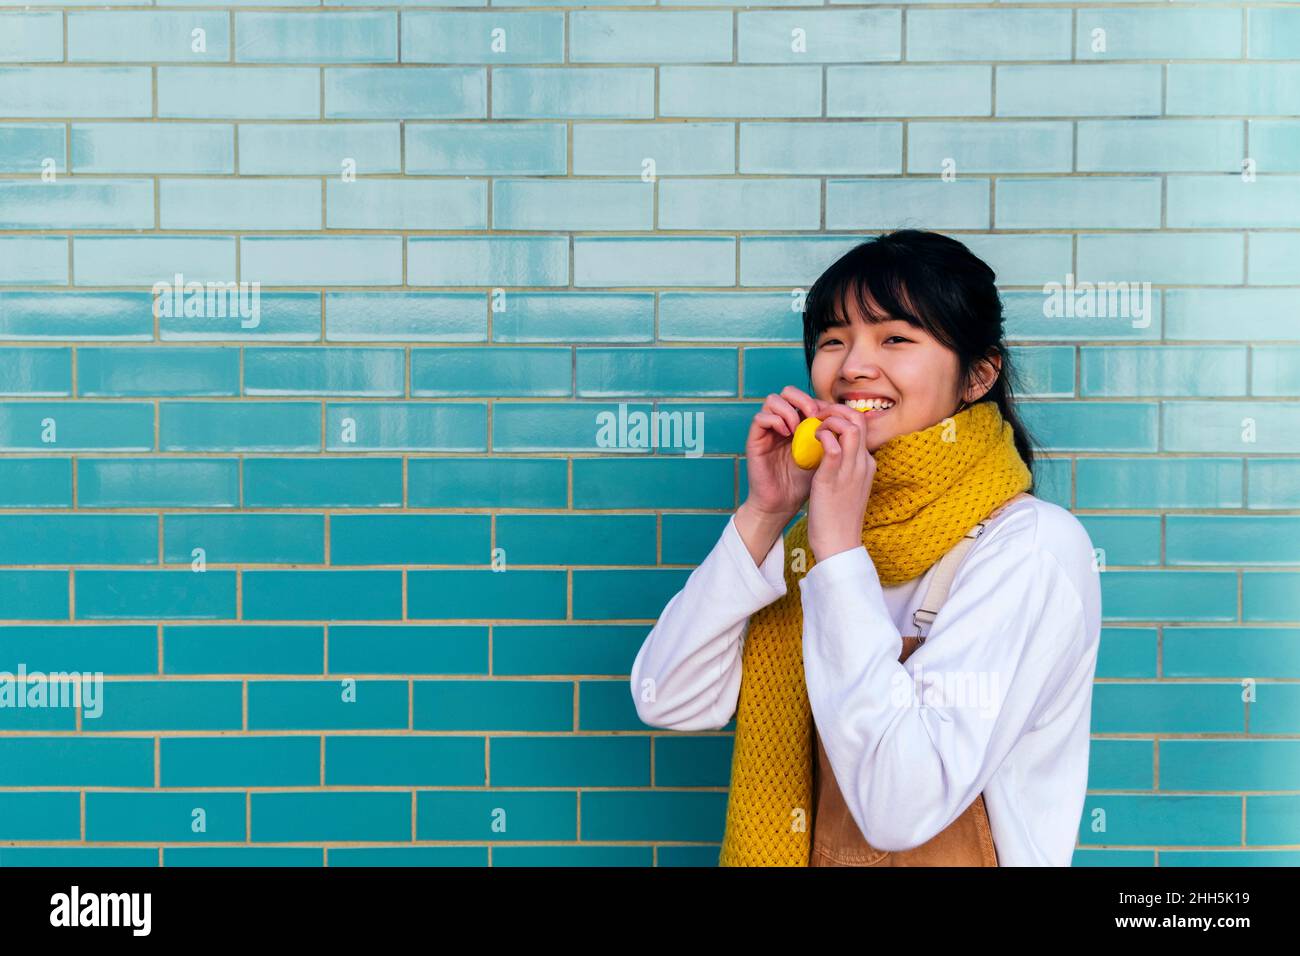 Smiling woman holding balloon in front of brick wall Stock Photo